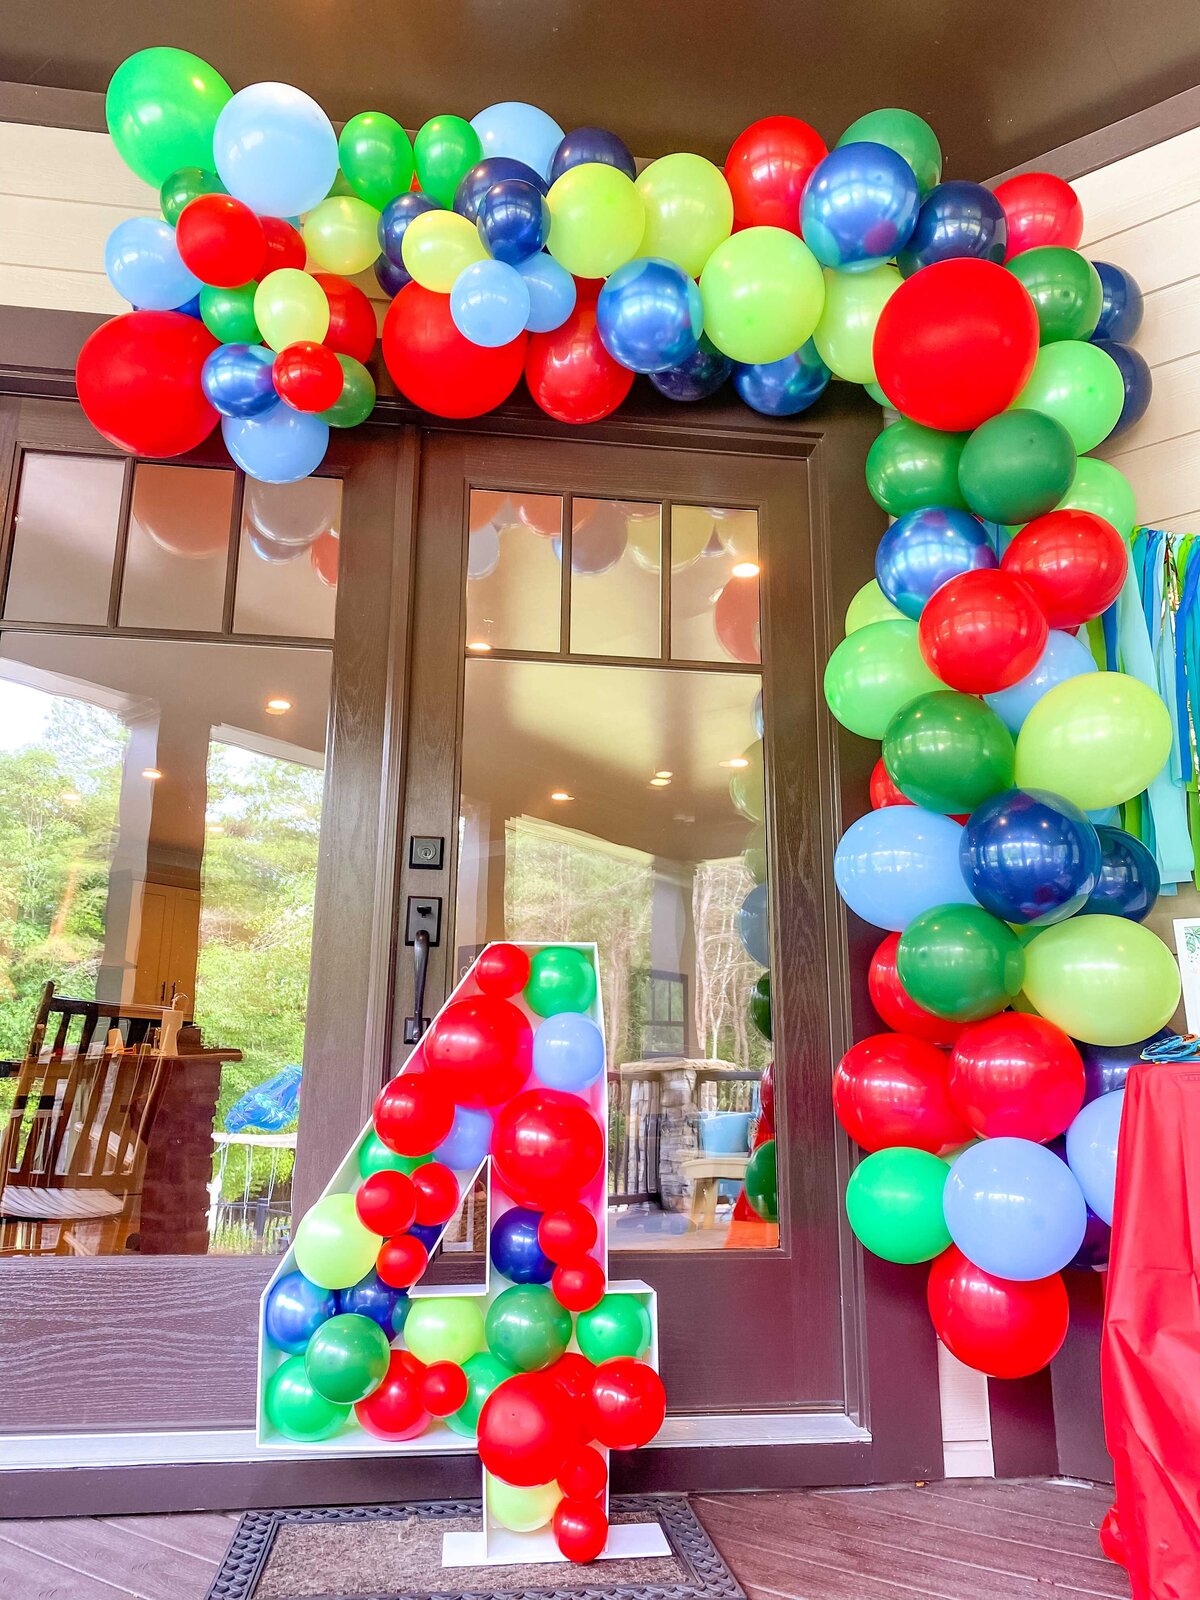 Huge number with balloons in it and balloon arch